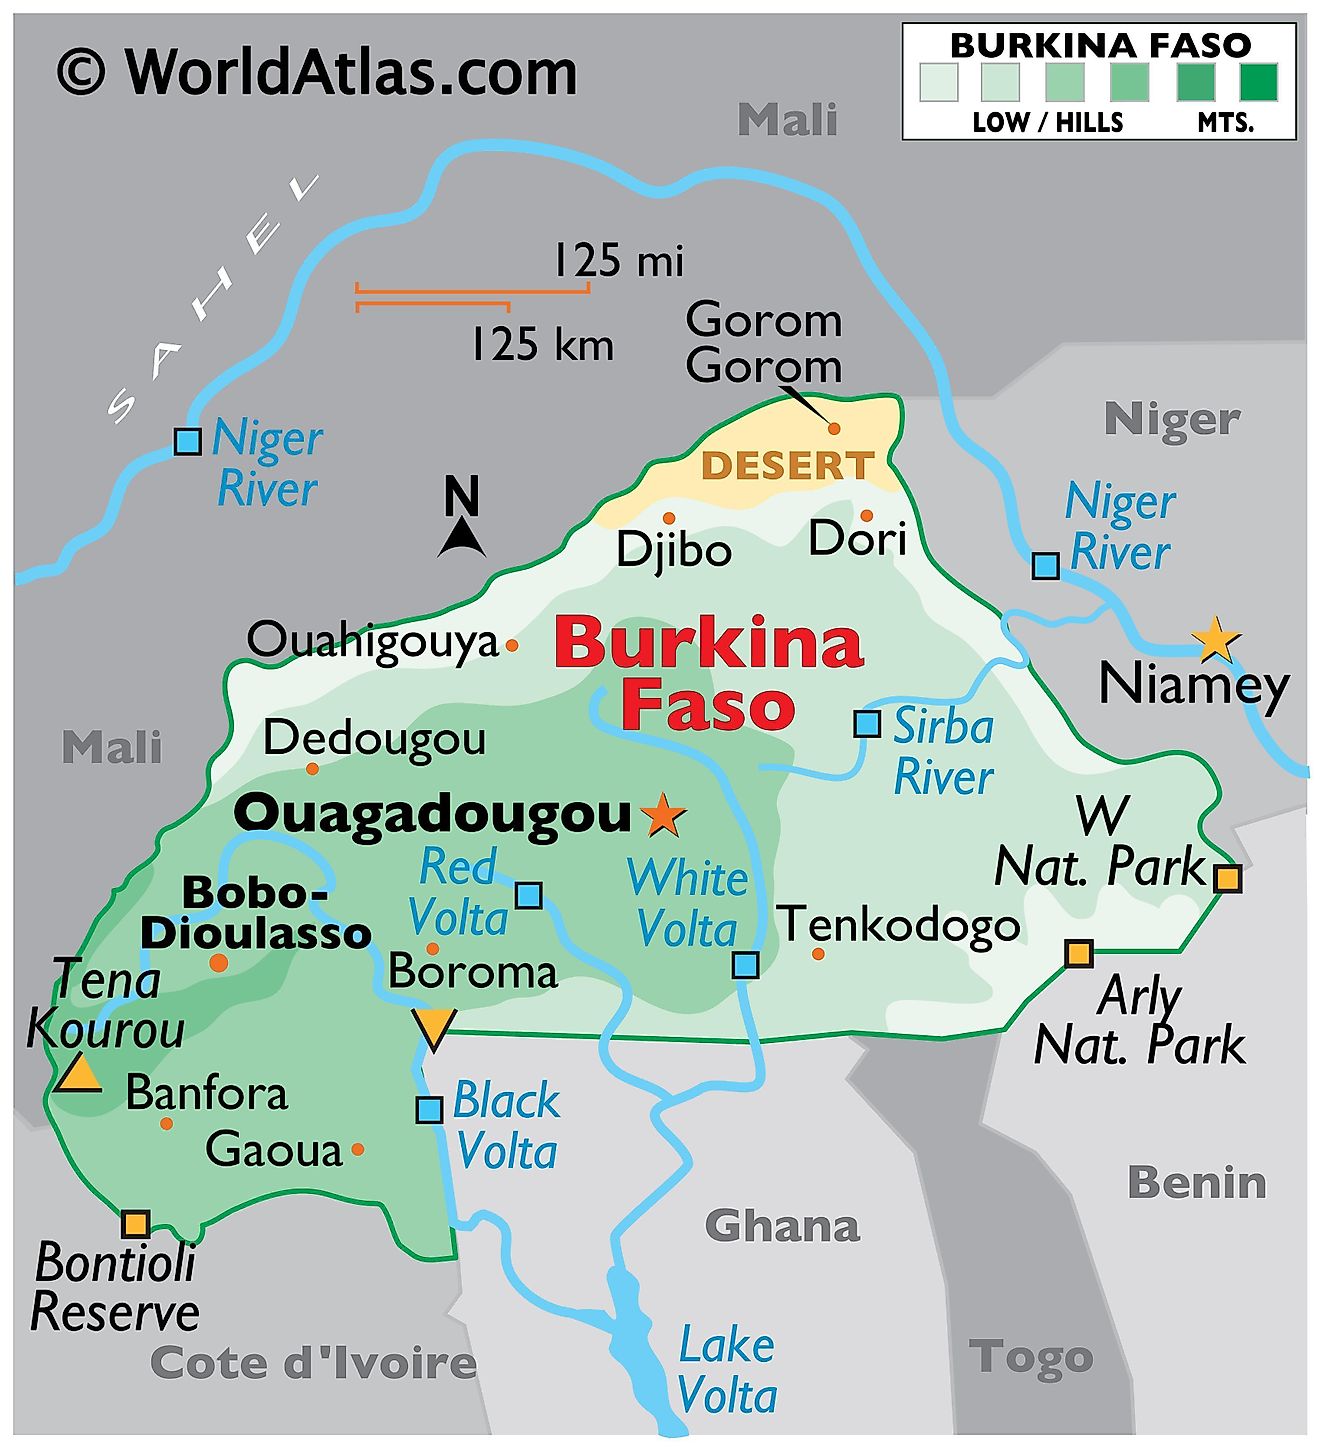 Physical map of Burkina Faso showing its state boundaries, relief, major rivers, extreme points, national parks, and major cities.